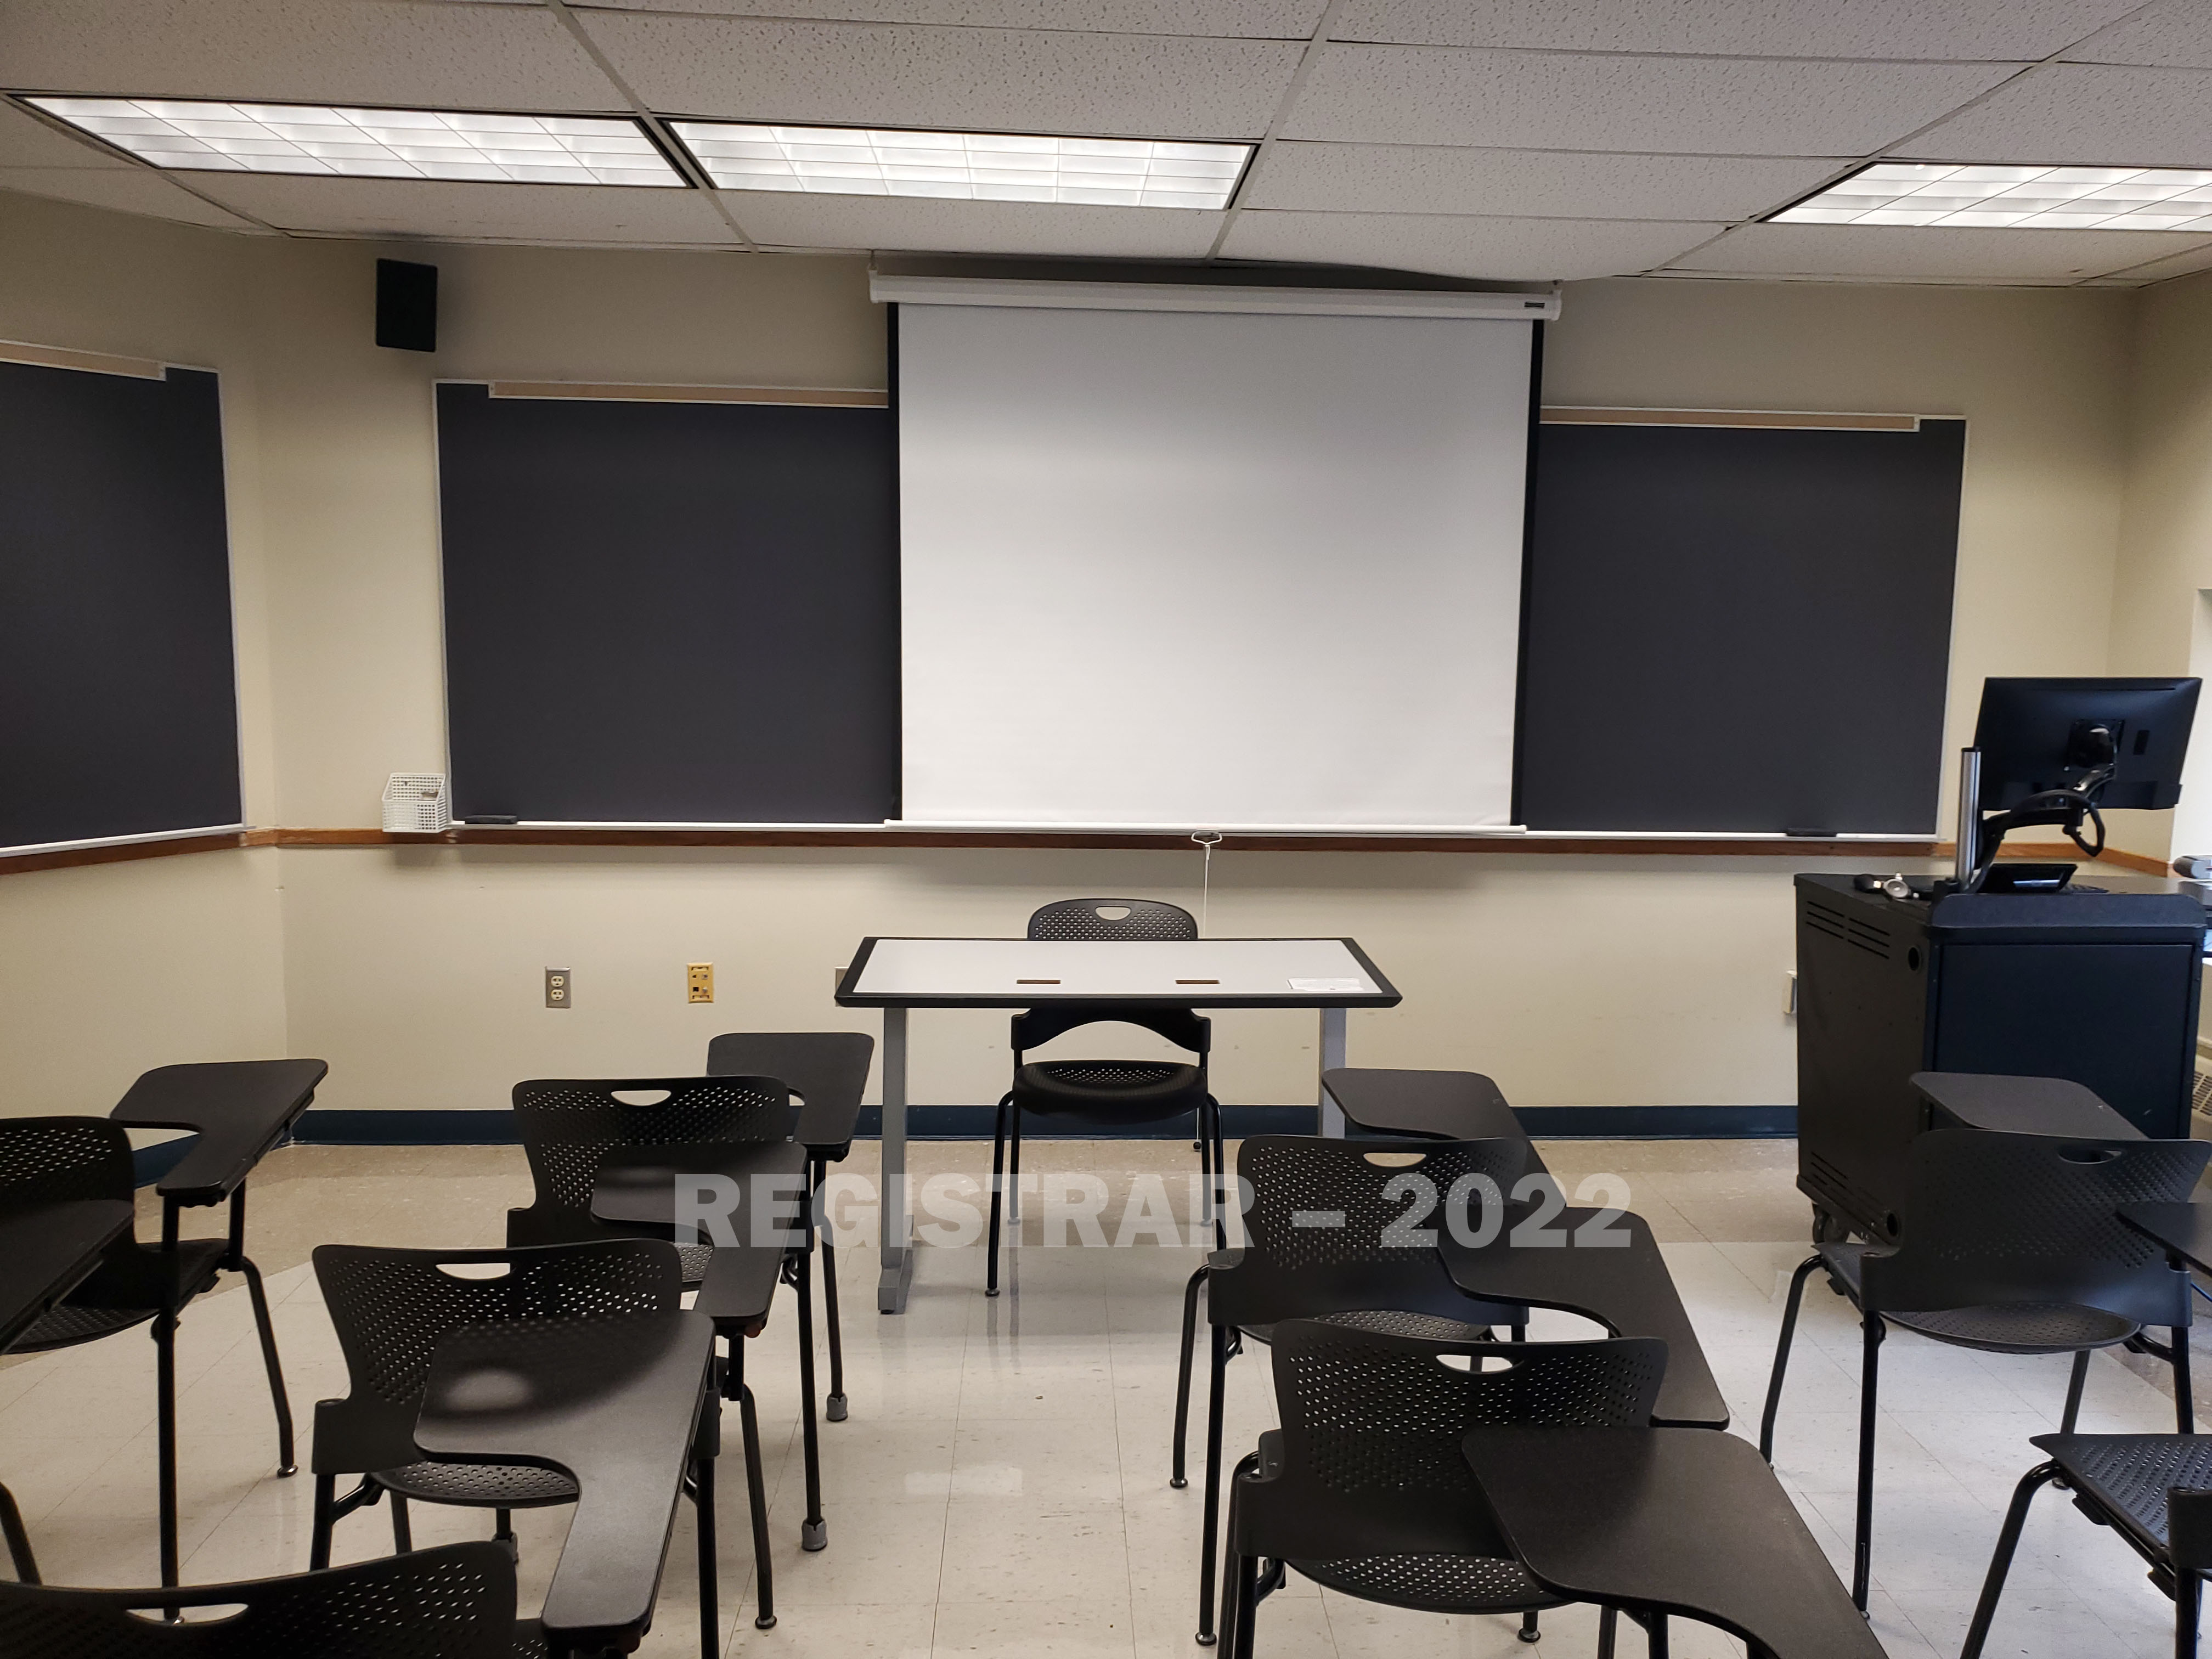 Enarson Classroom Building room 218 view from the back of the room with projector screen down